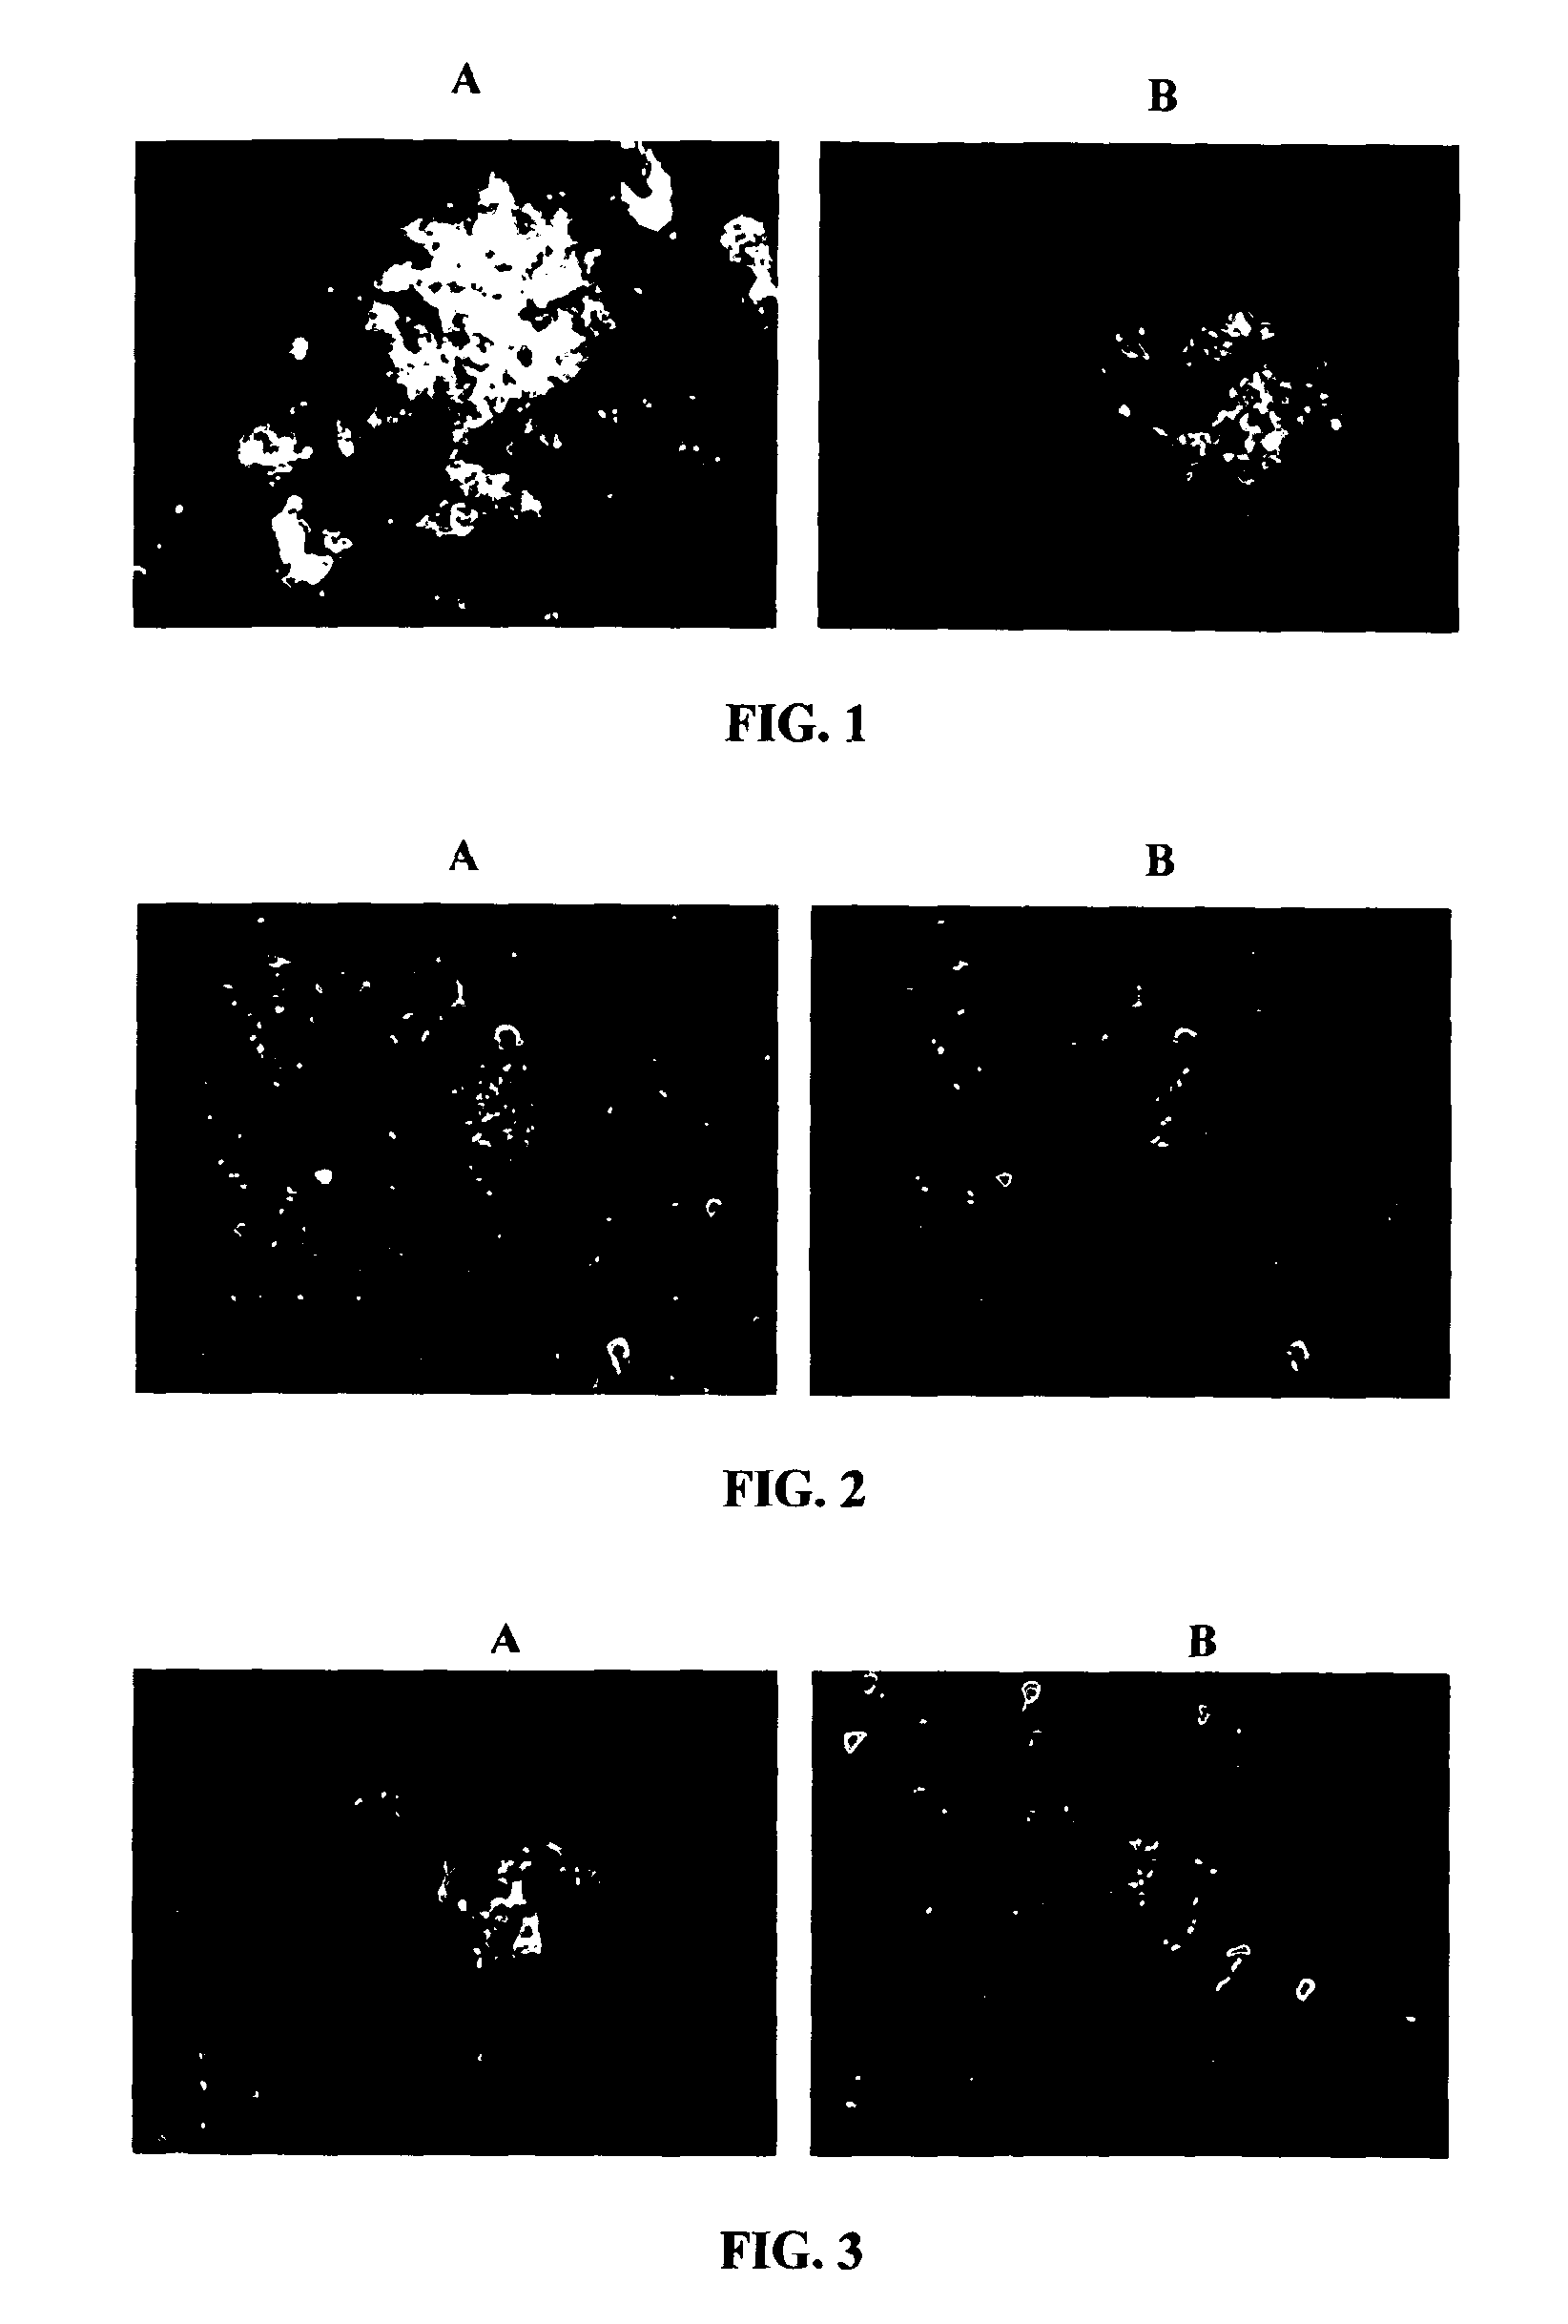 Method of providing disease-specific binding molecules and targets